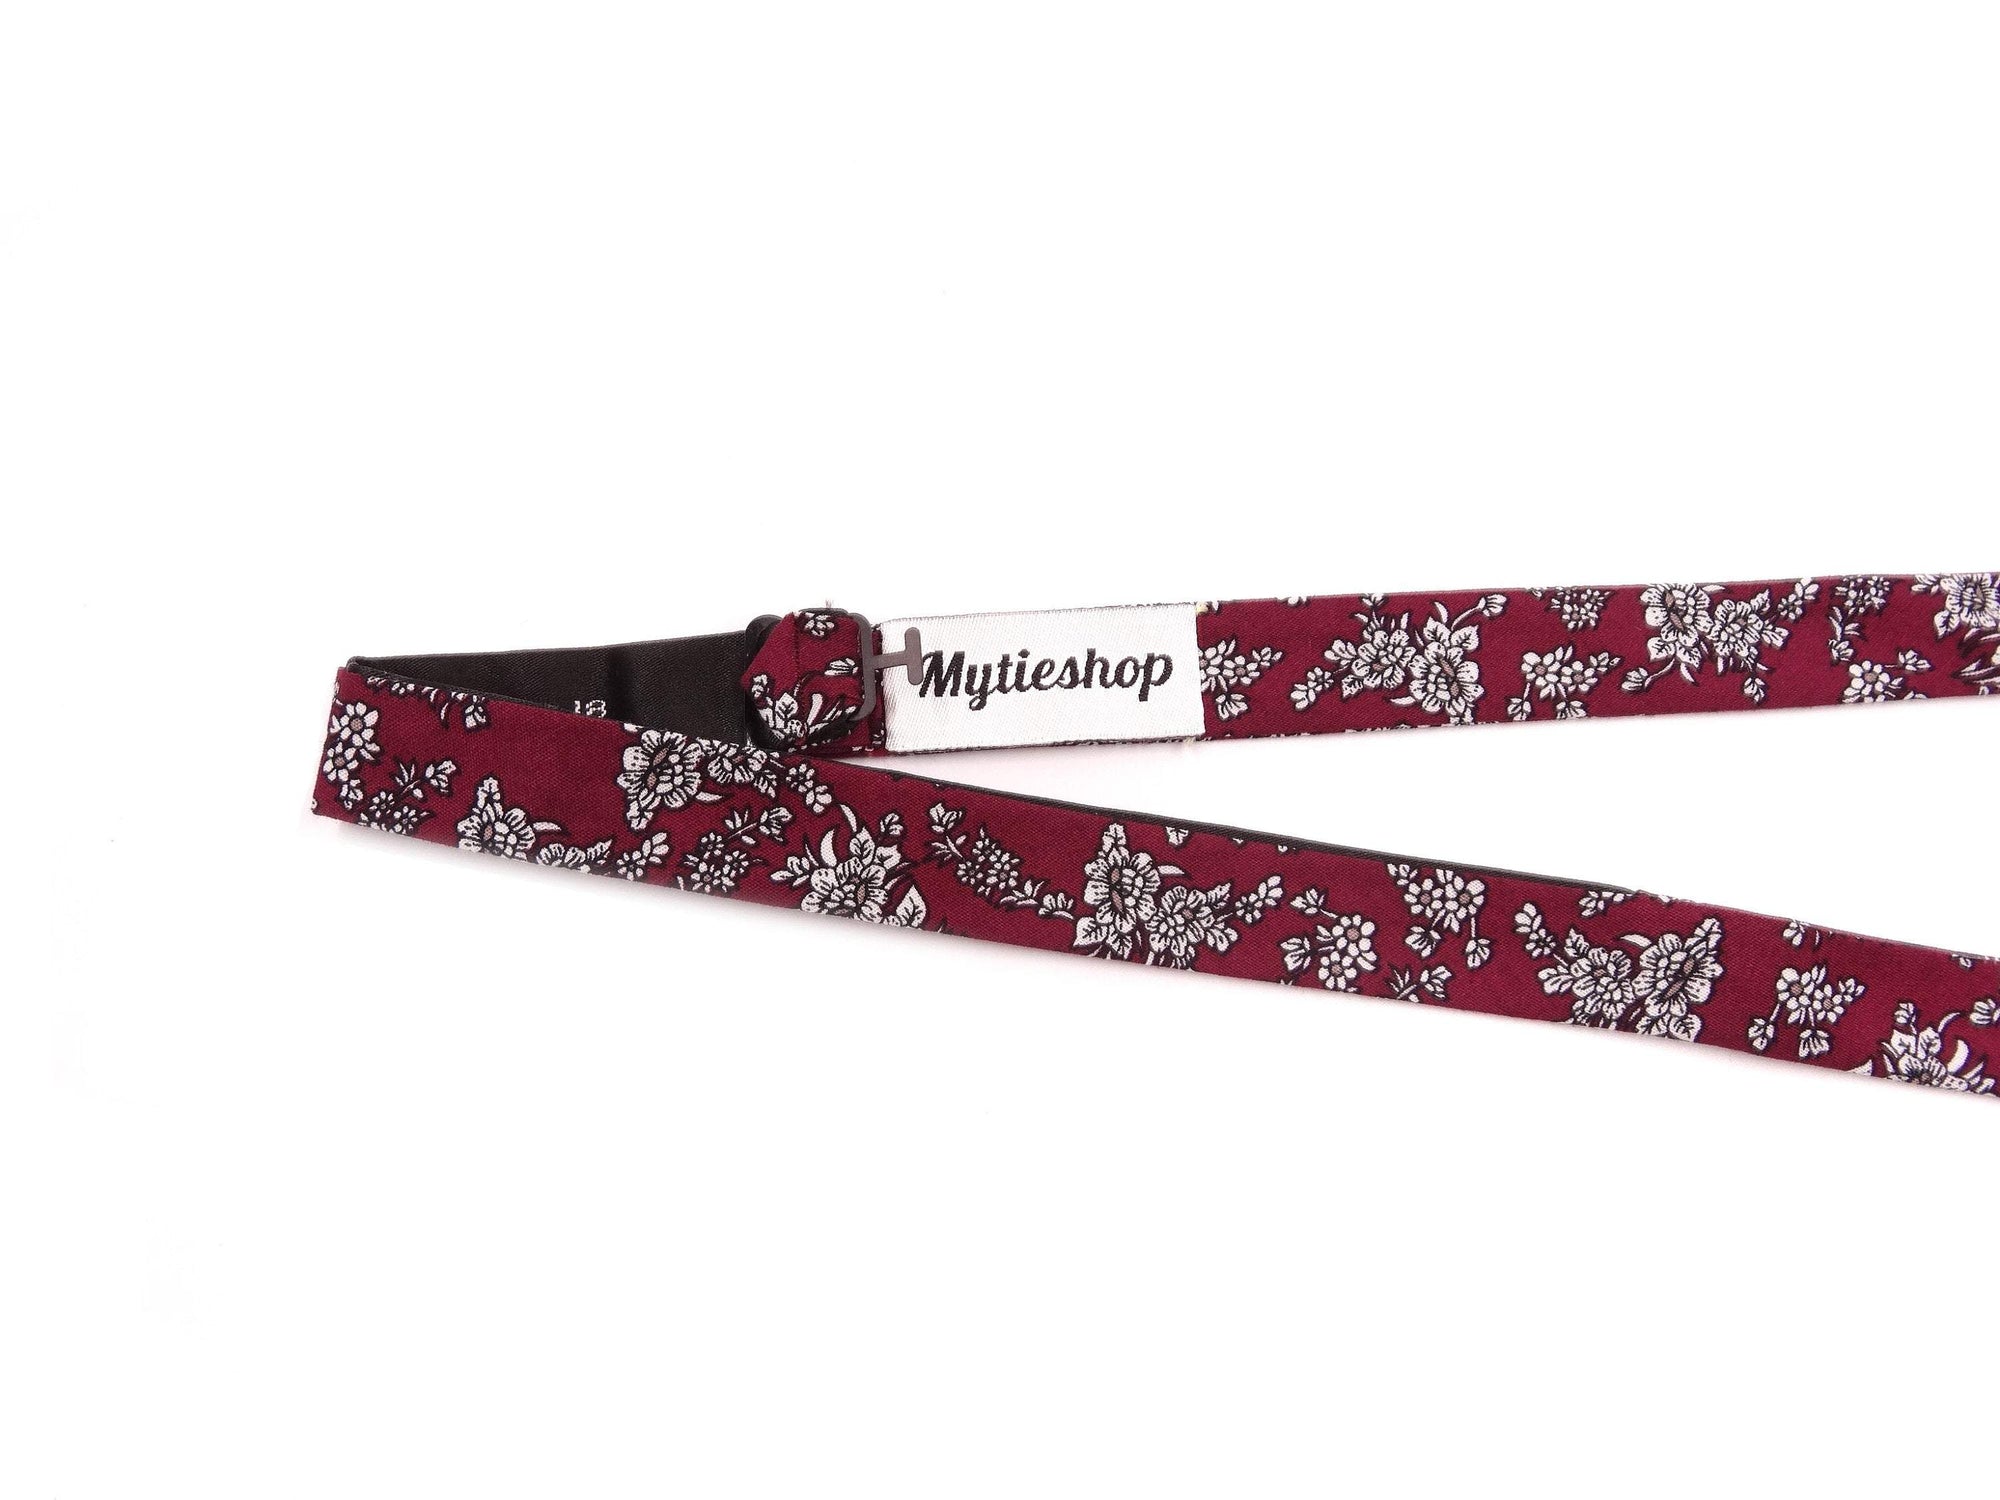 Maroon Floral Bow Tie Self Tie MYTIESHOP PRESTON-Maroon Floral Bow Tie Self Tie 100% Cotton Flannel Handmade Adjustable to fit most neck sizes 13 3/4" - 18" Color: Burgundy Great for Prom Dinners Interviews Photo shoots Photo sessions Dates Groom to stand out between his Groomsmen pair them up with neckties while he wears the bow tie. Floral self tie bow tie for weddings and events. Great anniversary present and gift. Also great gift for the groom and his groomsmen to wear at the wedding, and do